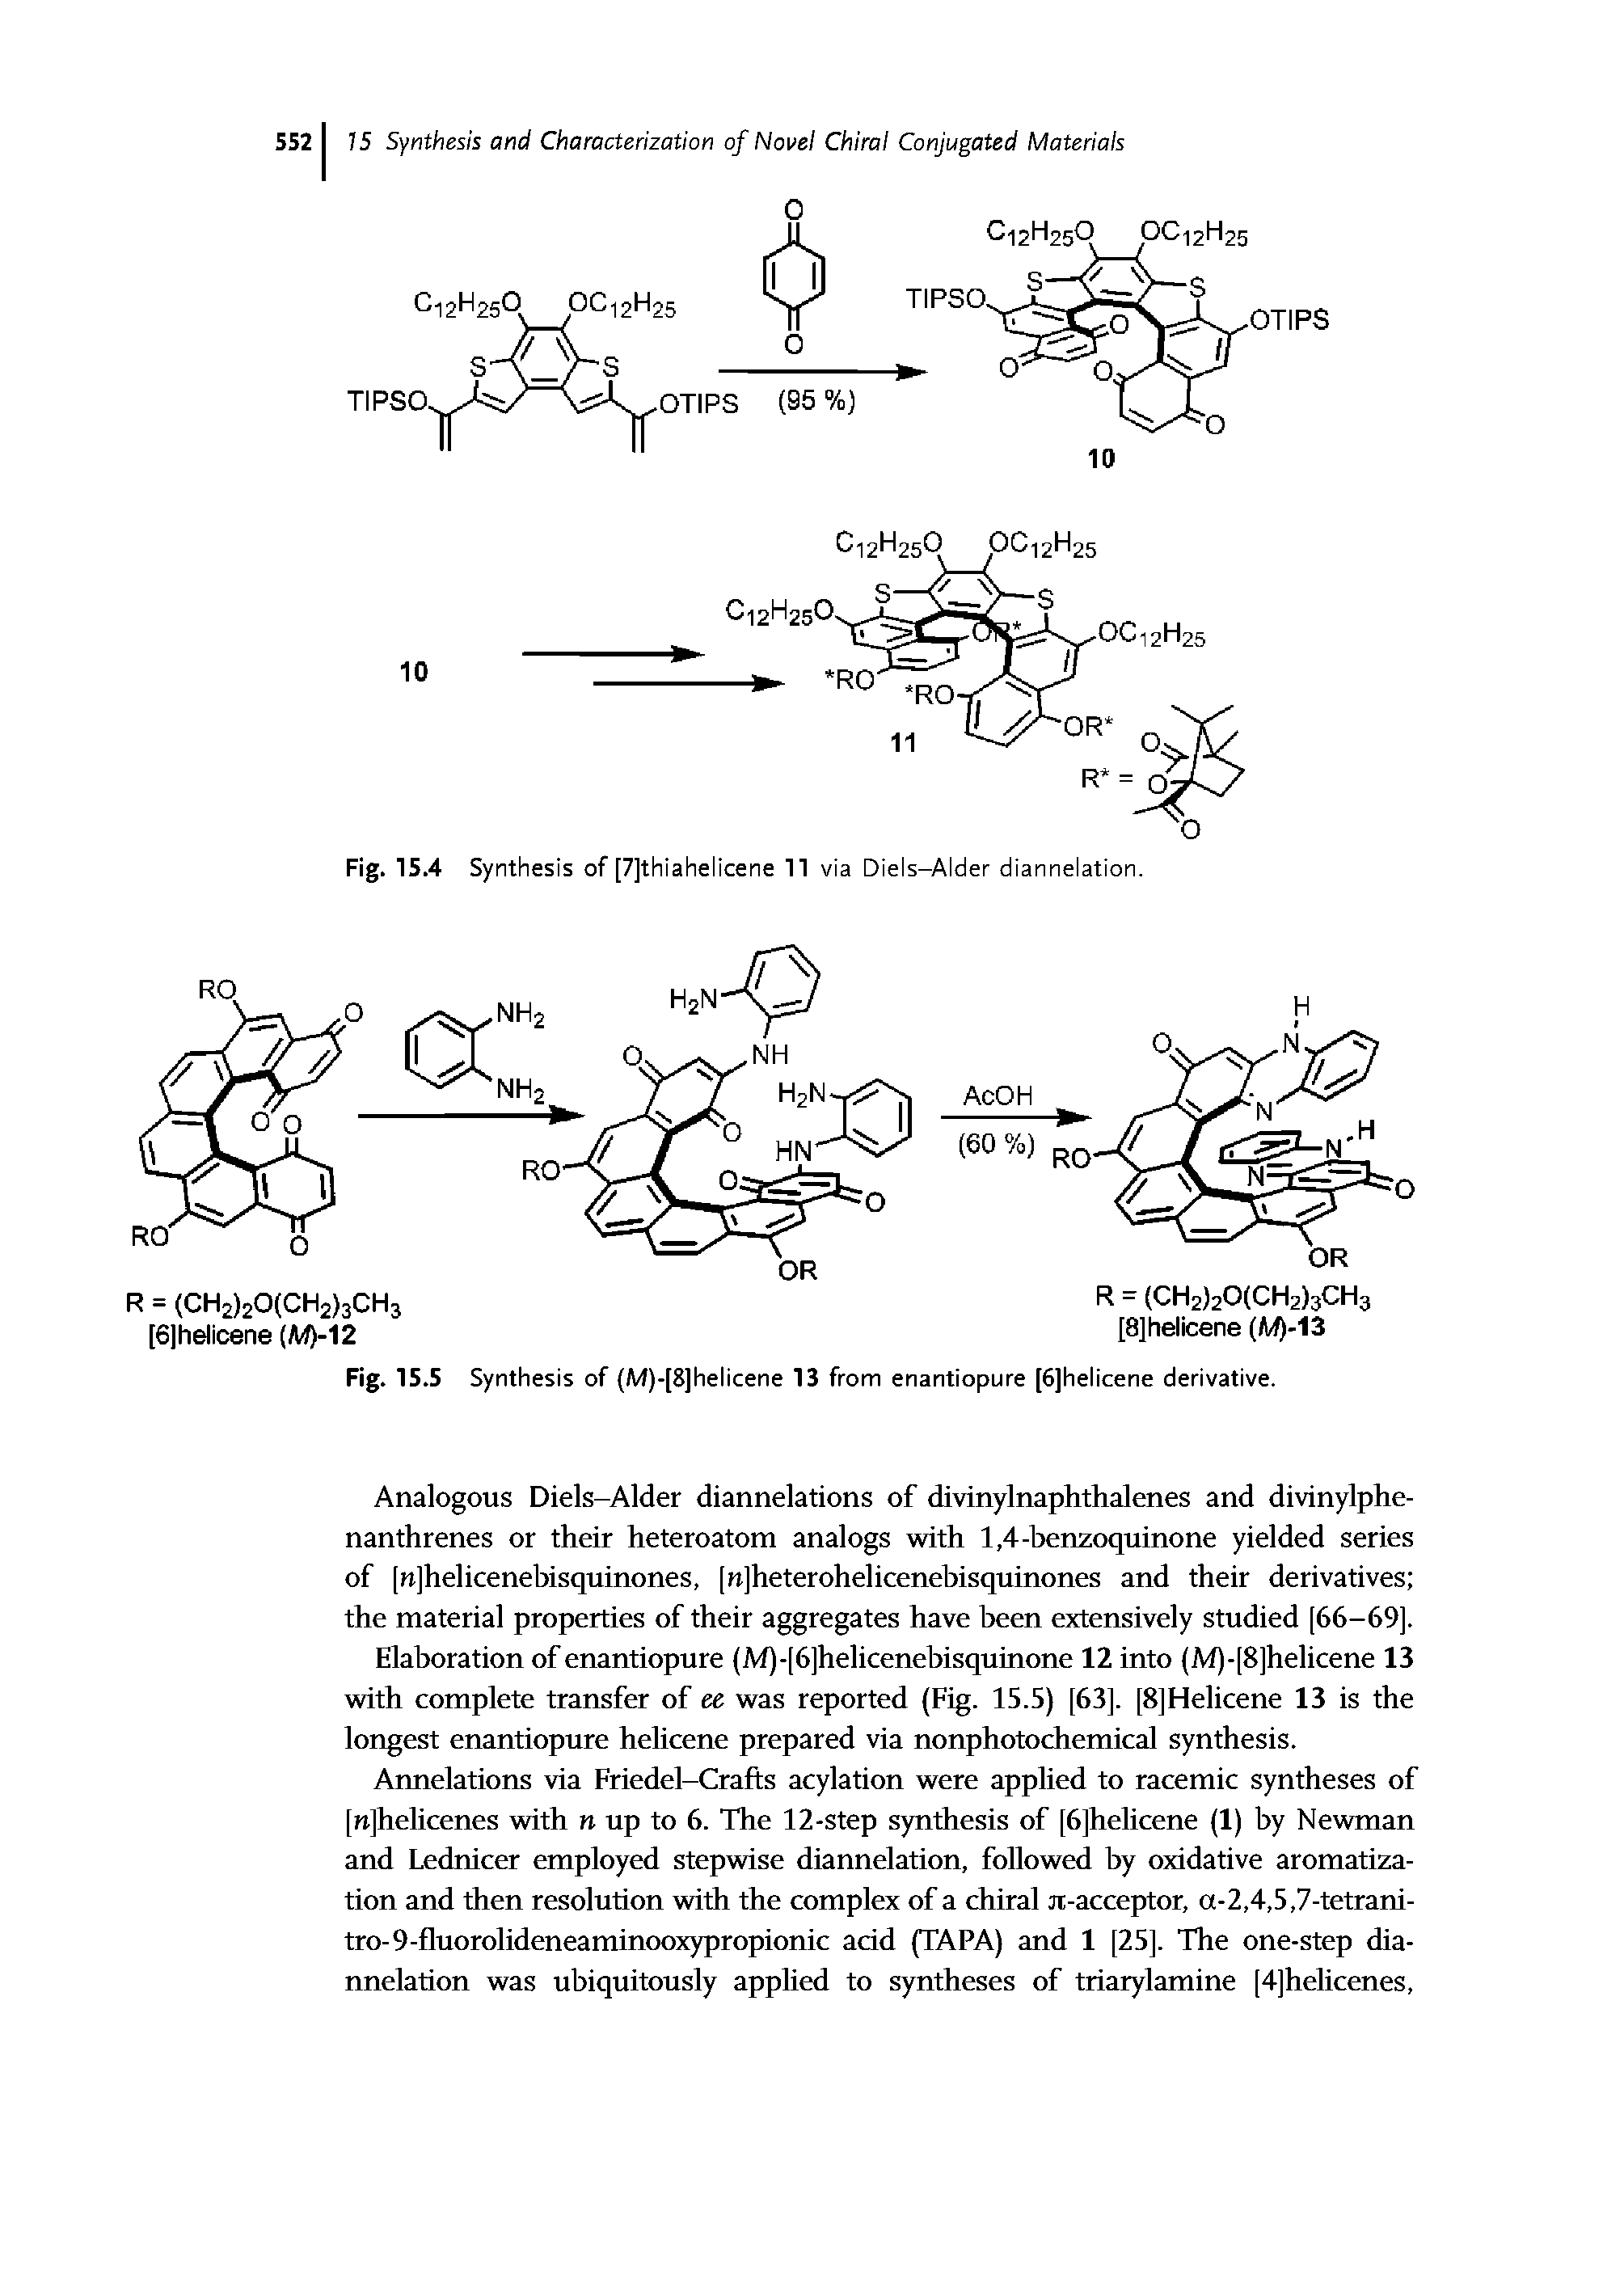 Fig. 15.5 Synthesis of (M)-[8]helicene 13 from enantiopure [6]helicene derivative.